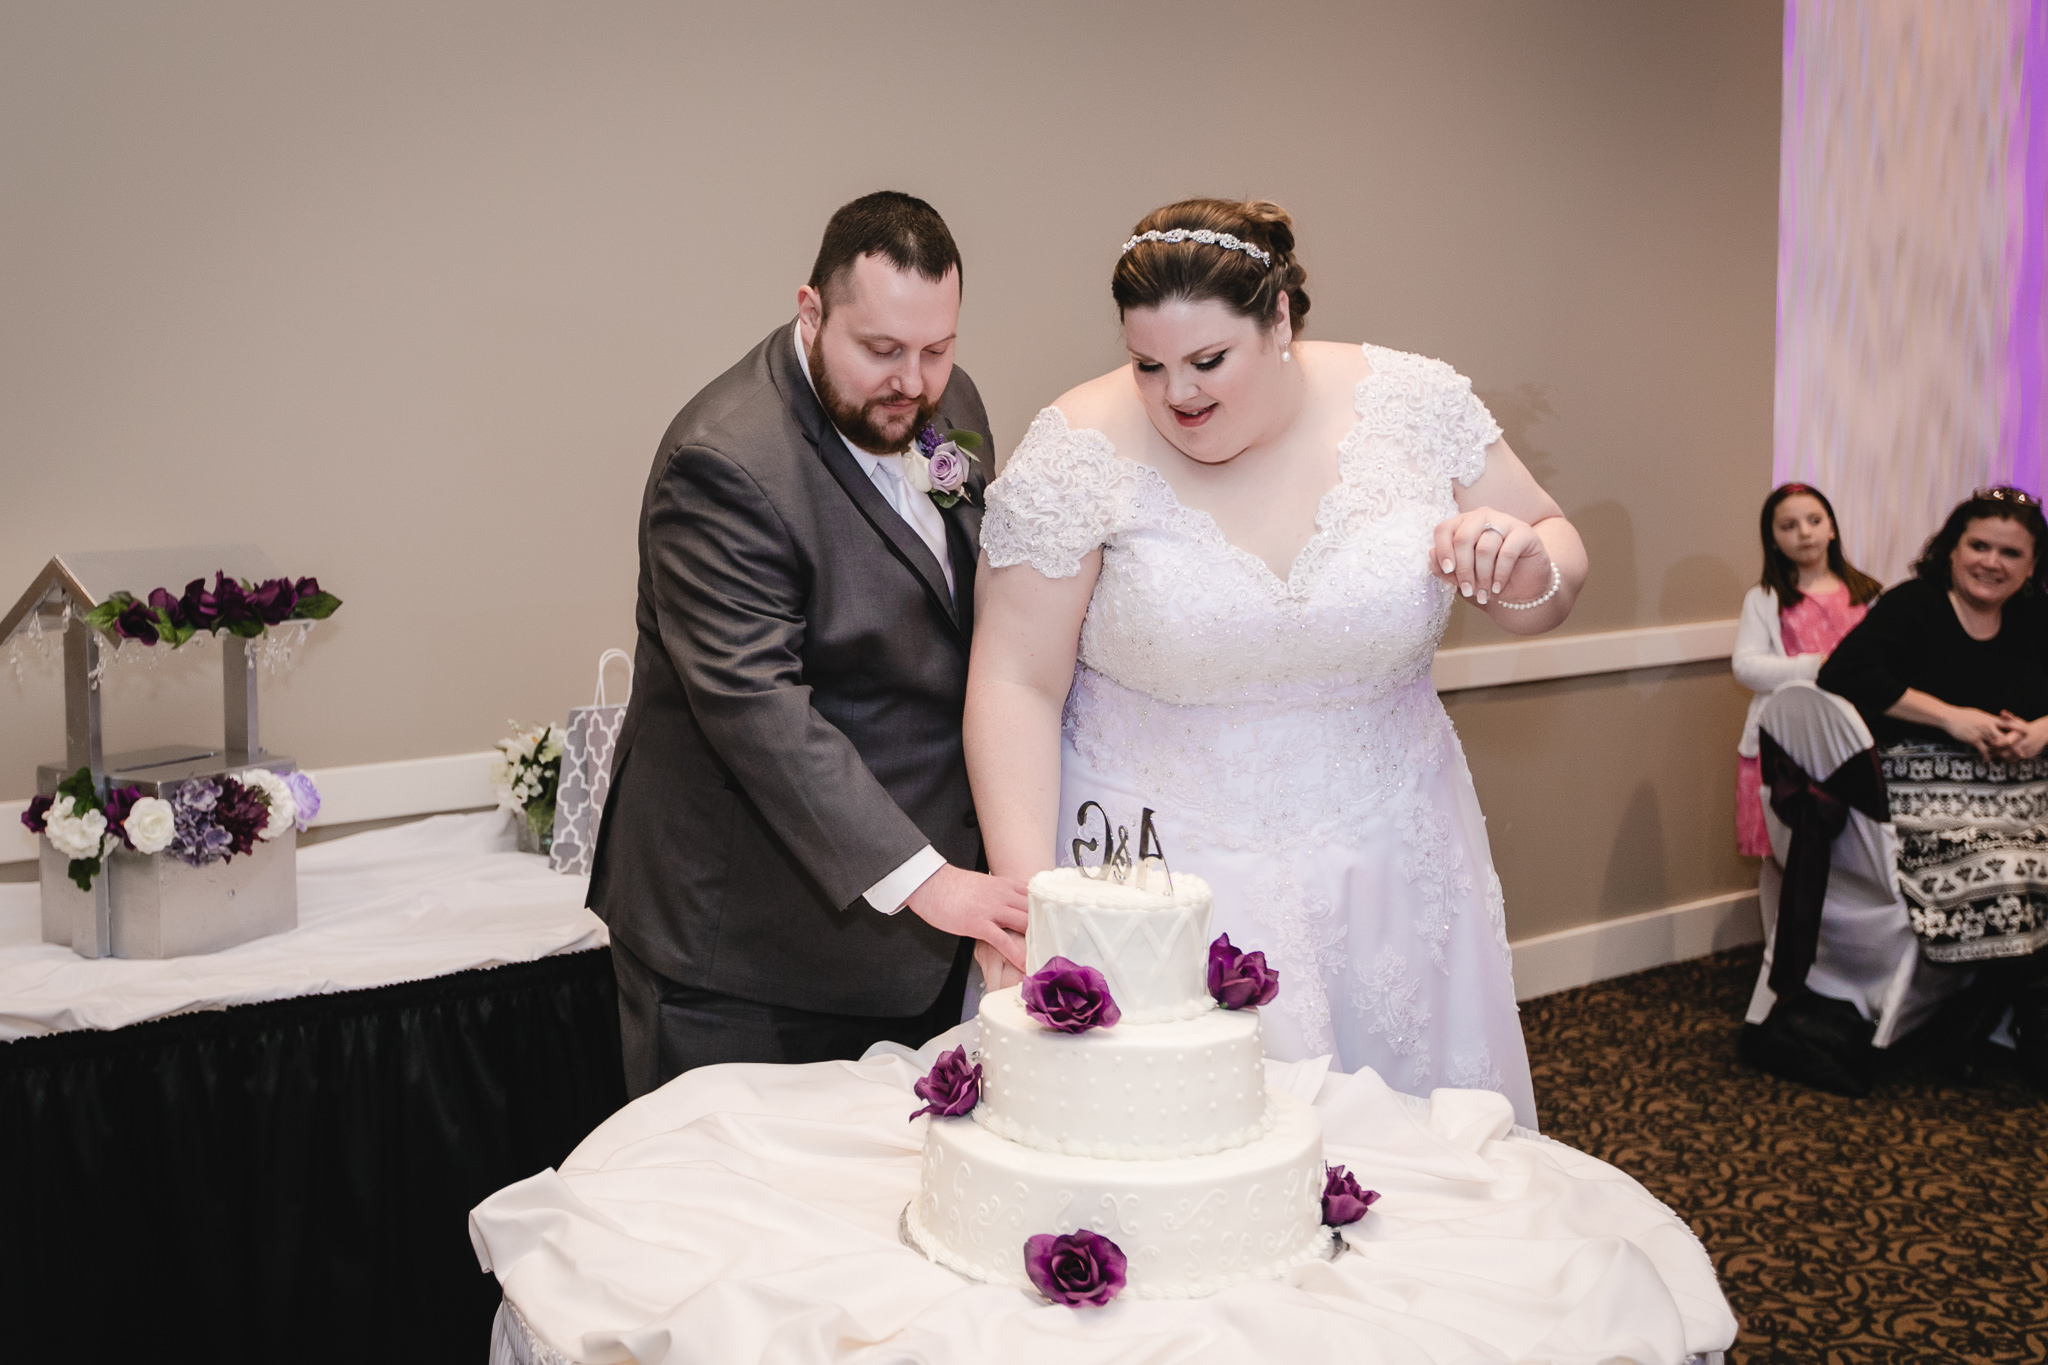 Cake cutting at a spring wedding at the Fez